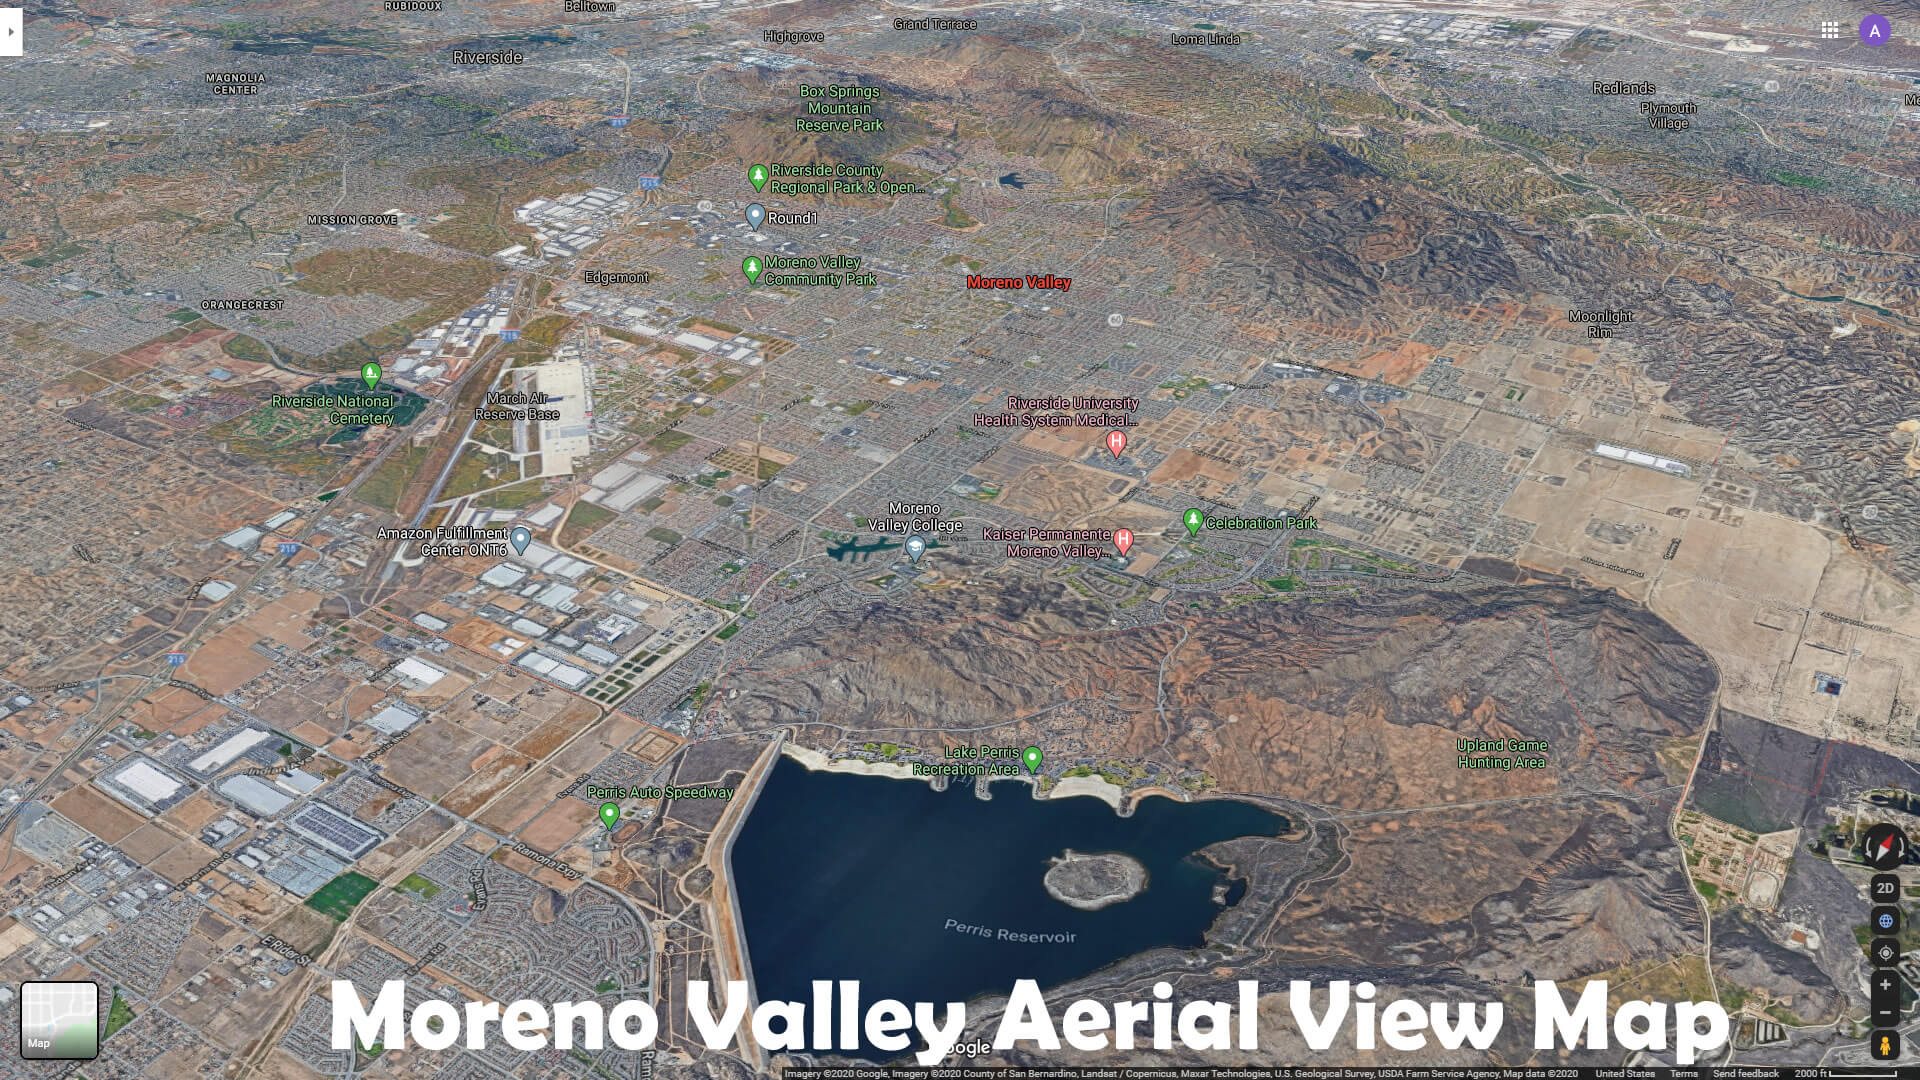 Moreno Valley Aerial View Map